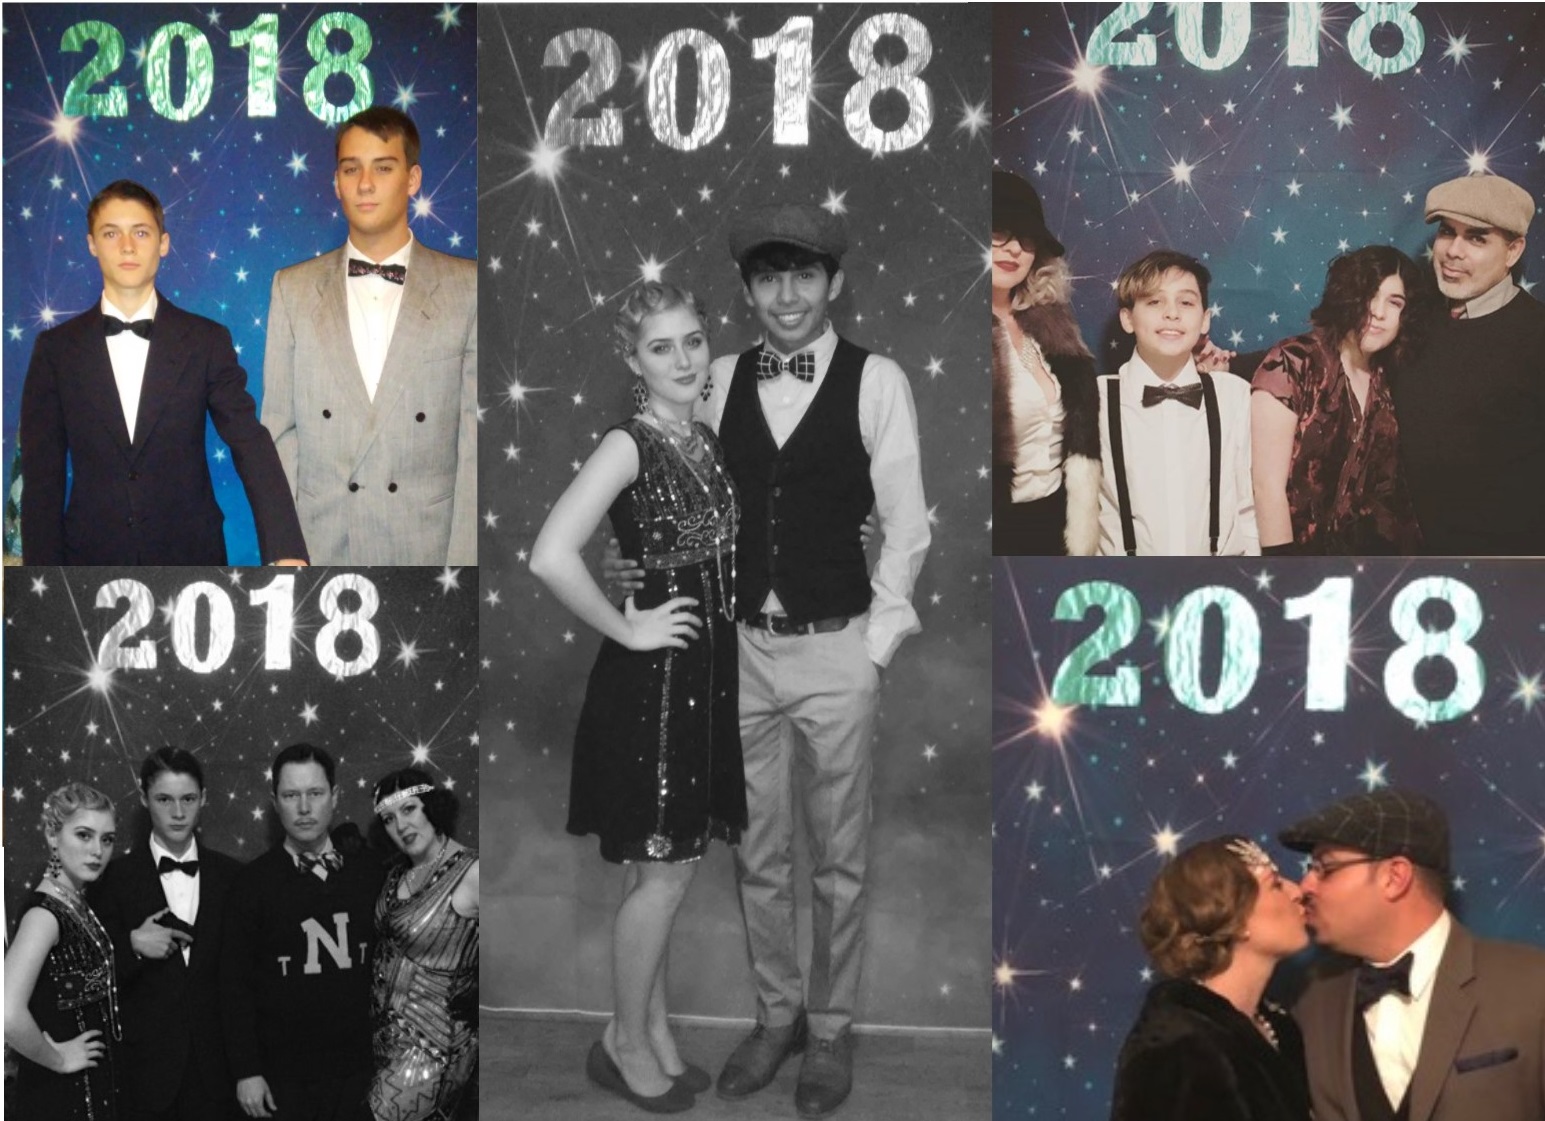 1920s New years Eve party 2018 backdrop collage